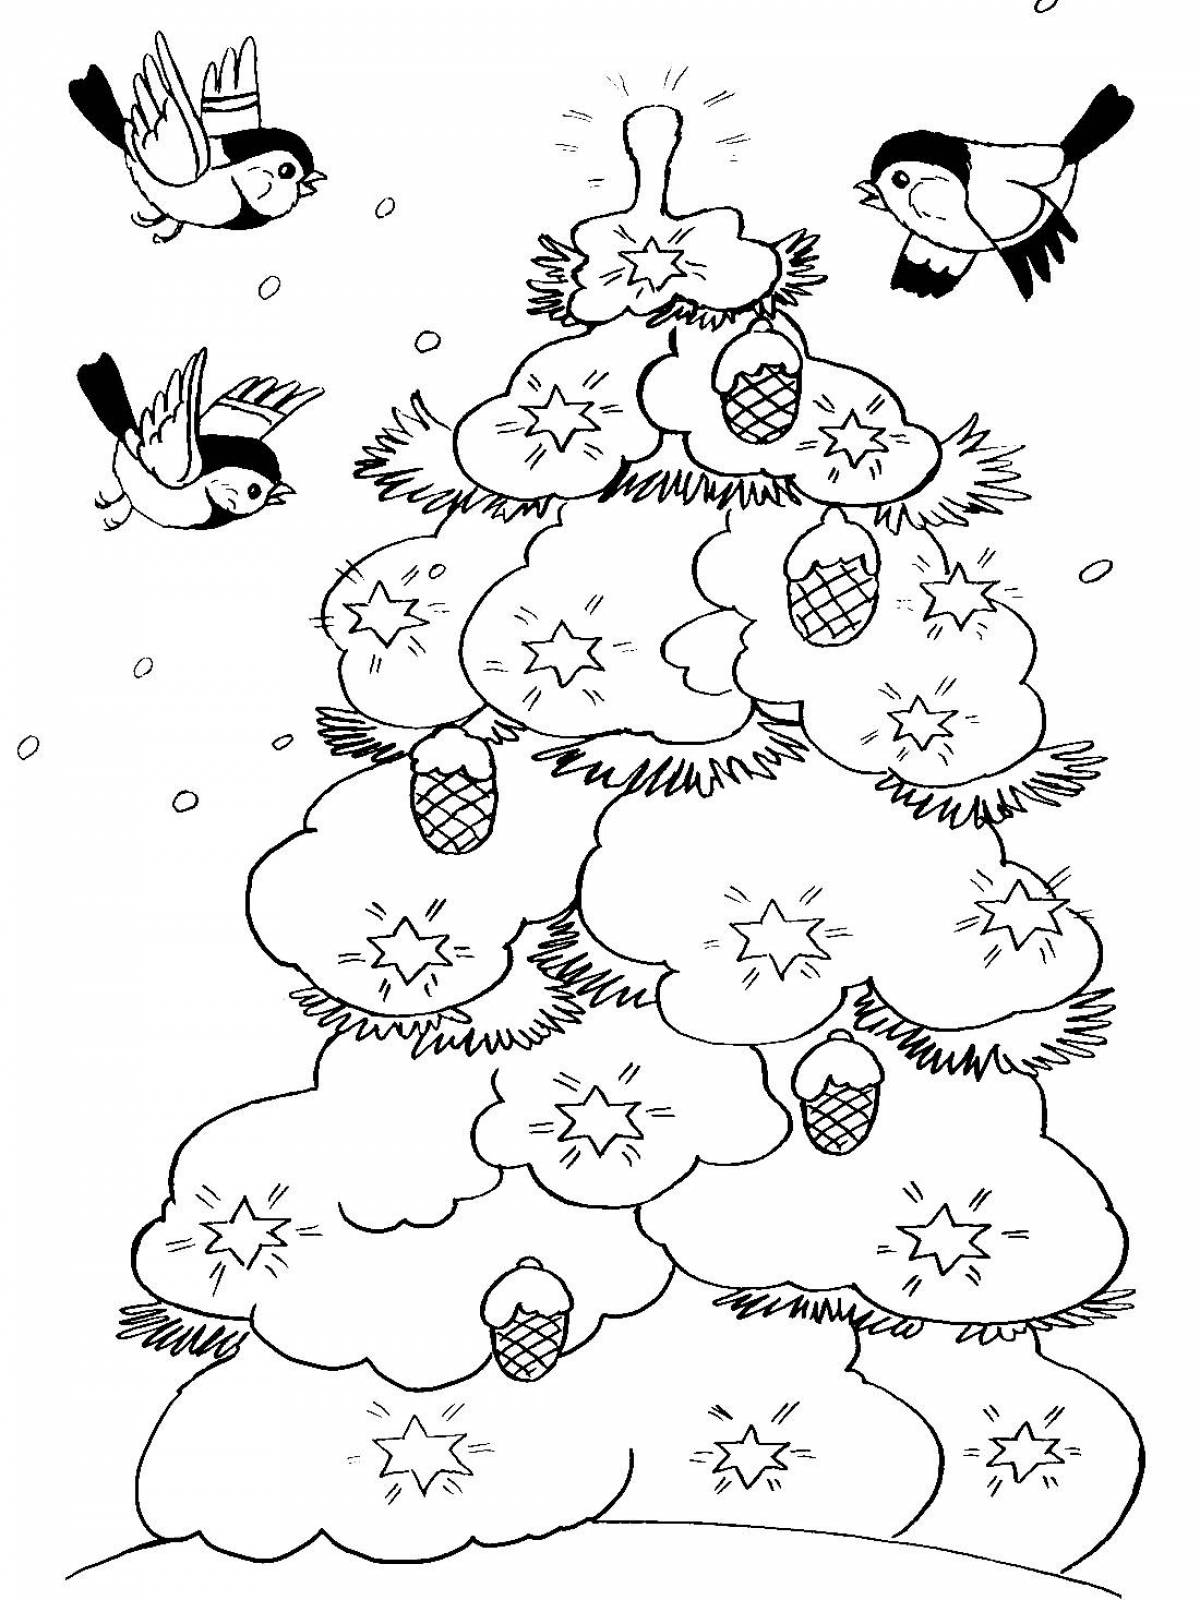 Whimsical winter coloring book for kids 6-7 years old